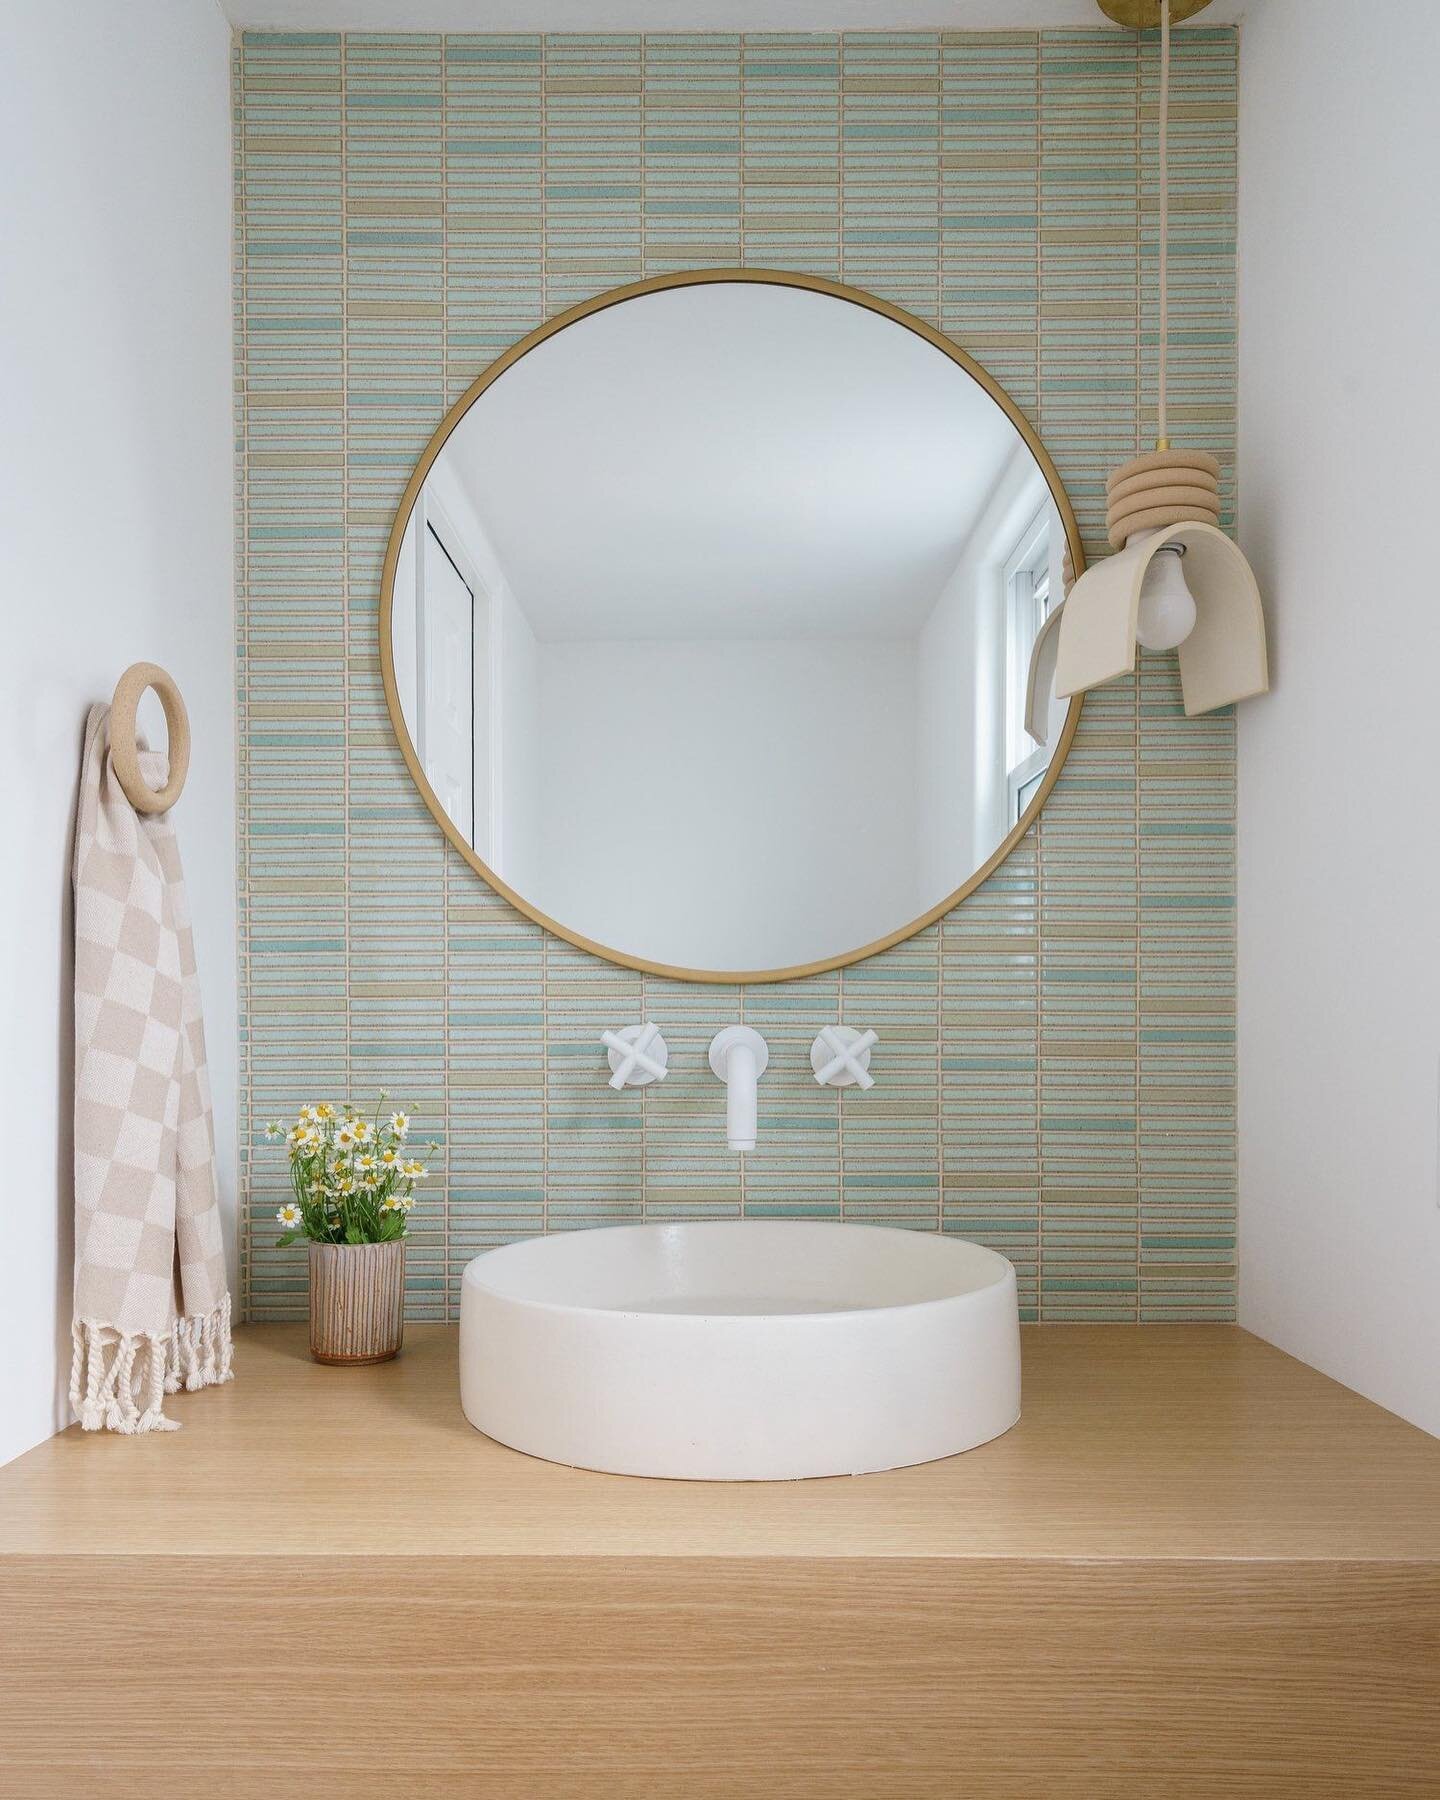 A matte white faucet, some mint green Kit Kat tile, and a ceramic pendant light give this small space some added character! 
📸 by @charlotteleaphotography 
Design by Popix Designs